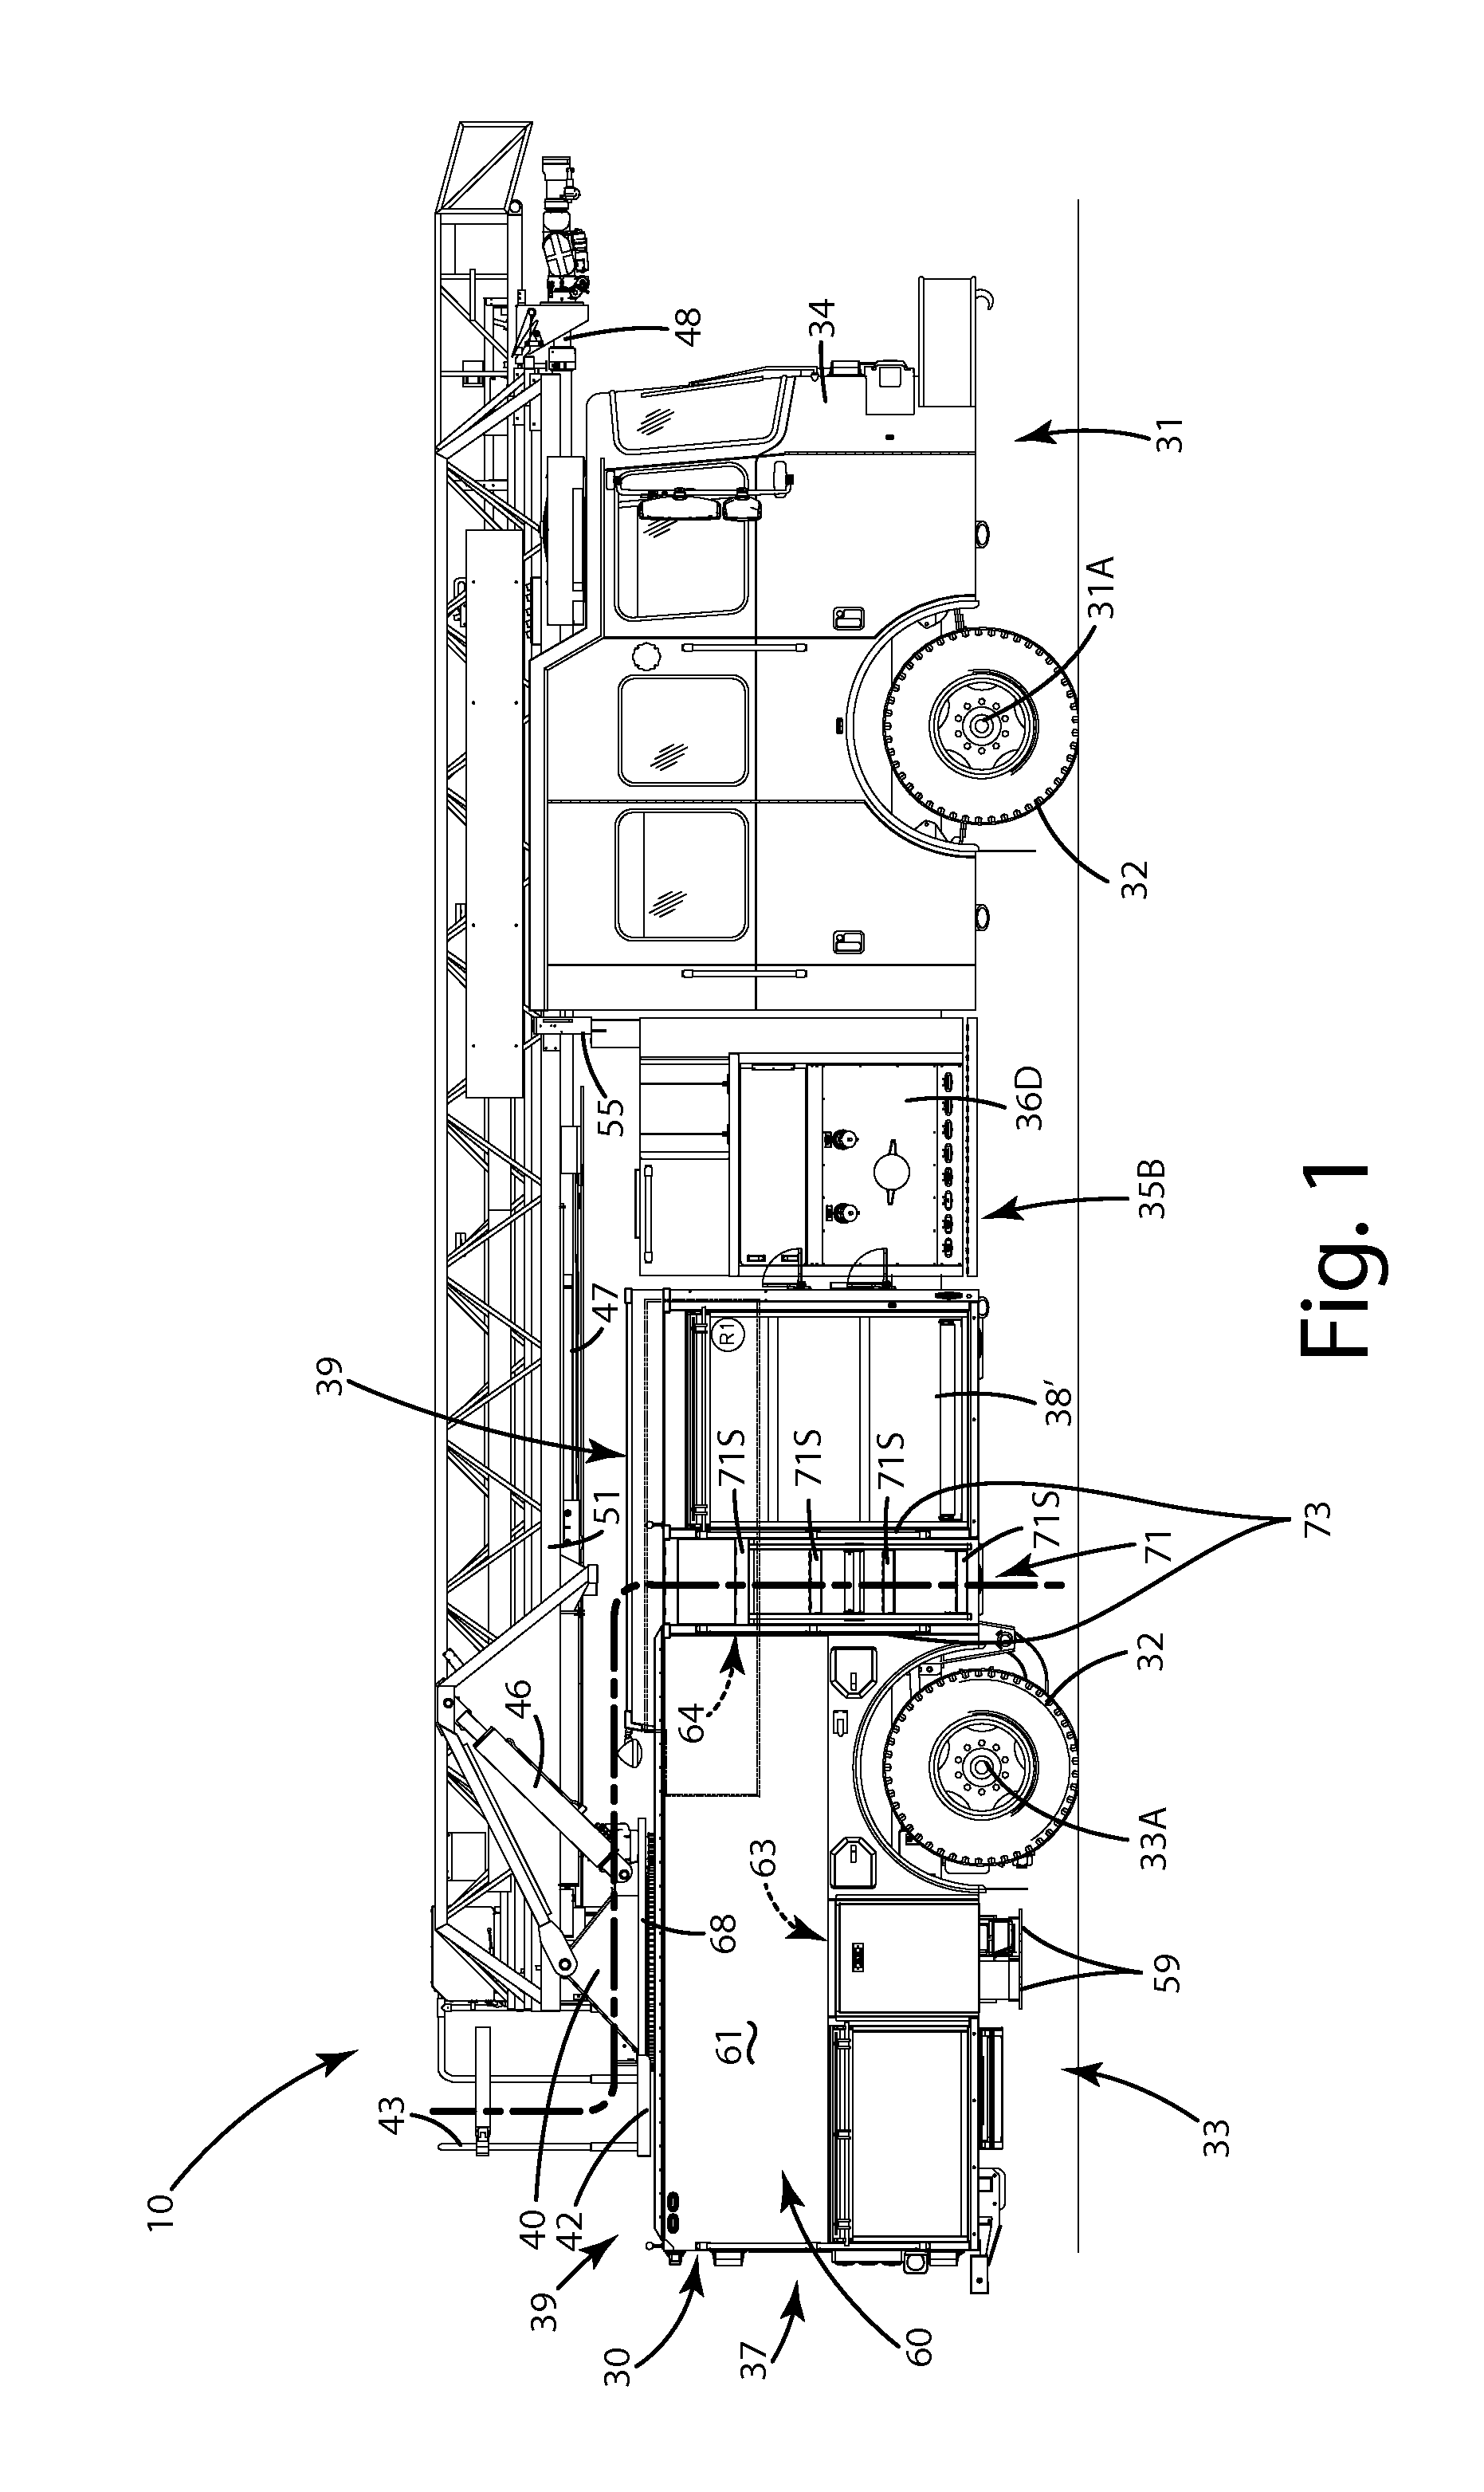 Firefighting or rescue apparatus including side access ladder